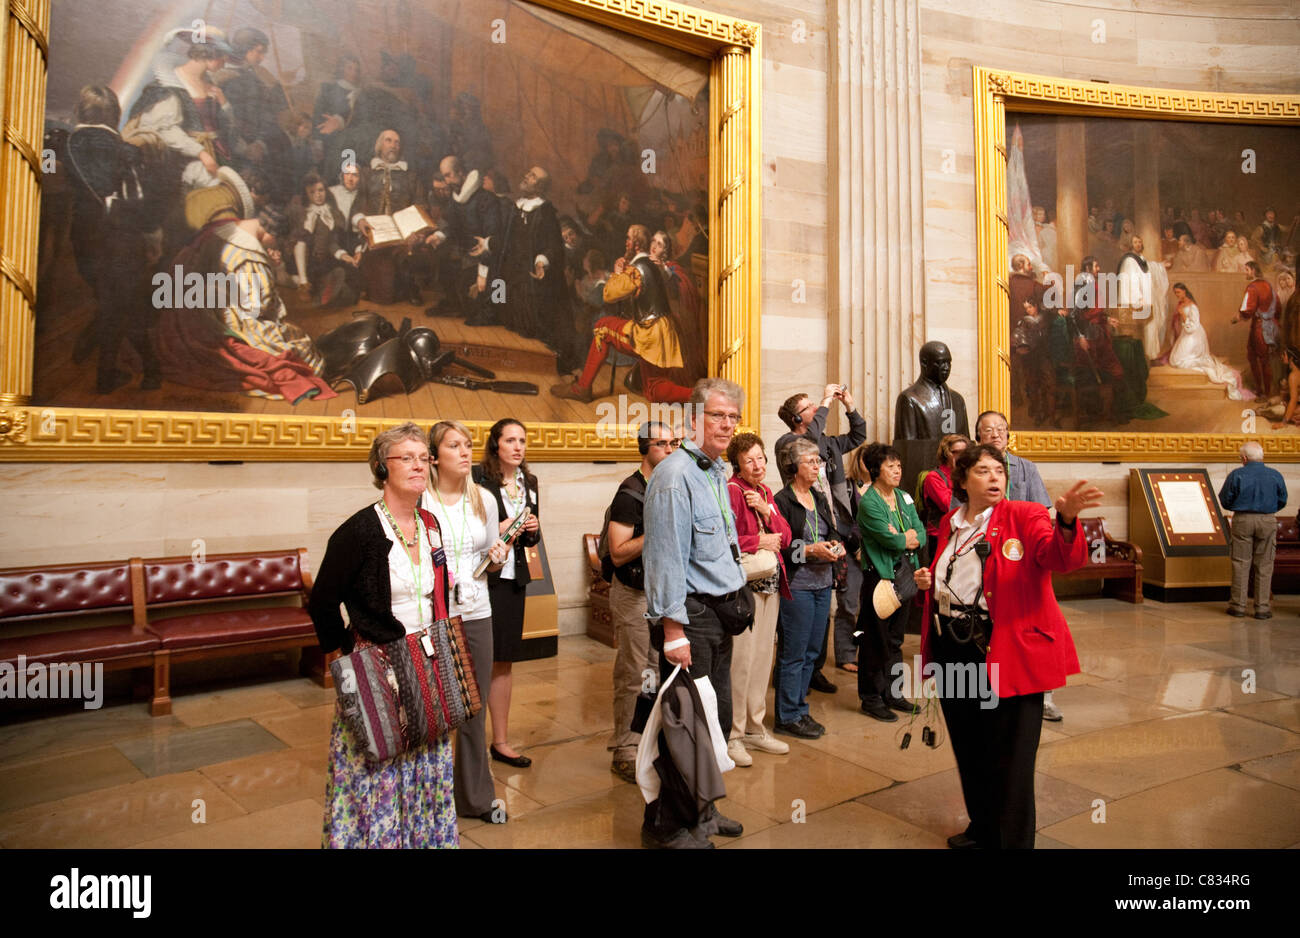 visitors-on-a-guided-tour-in-the-rotunda